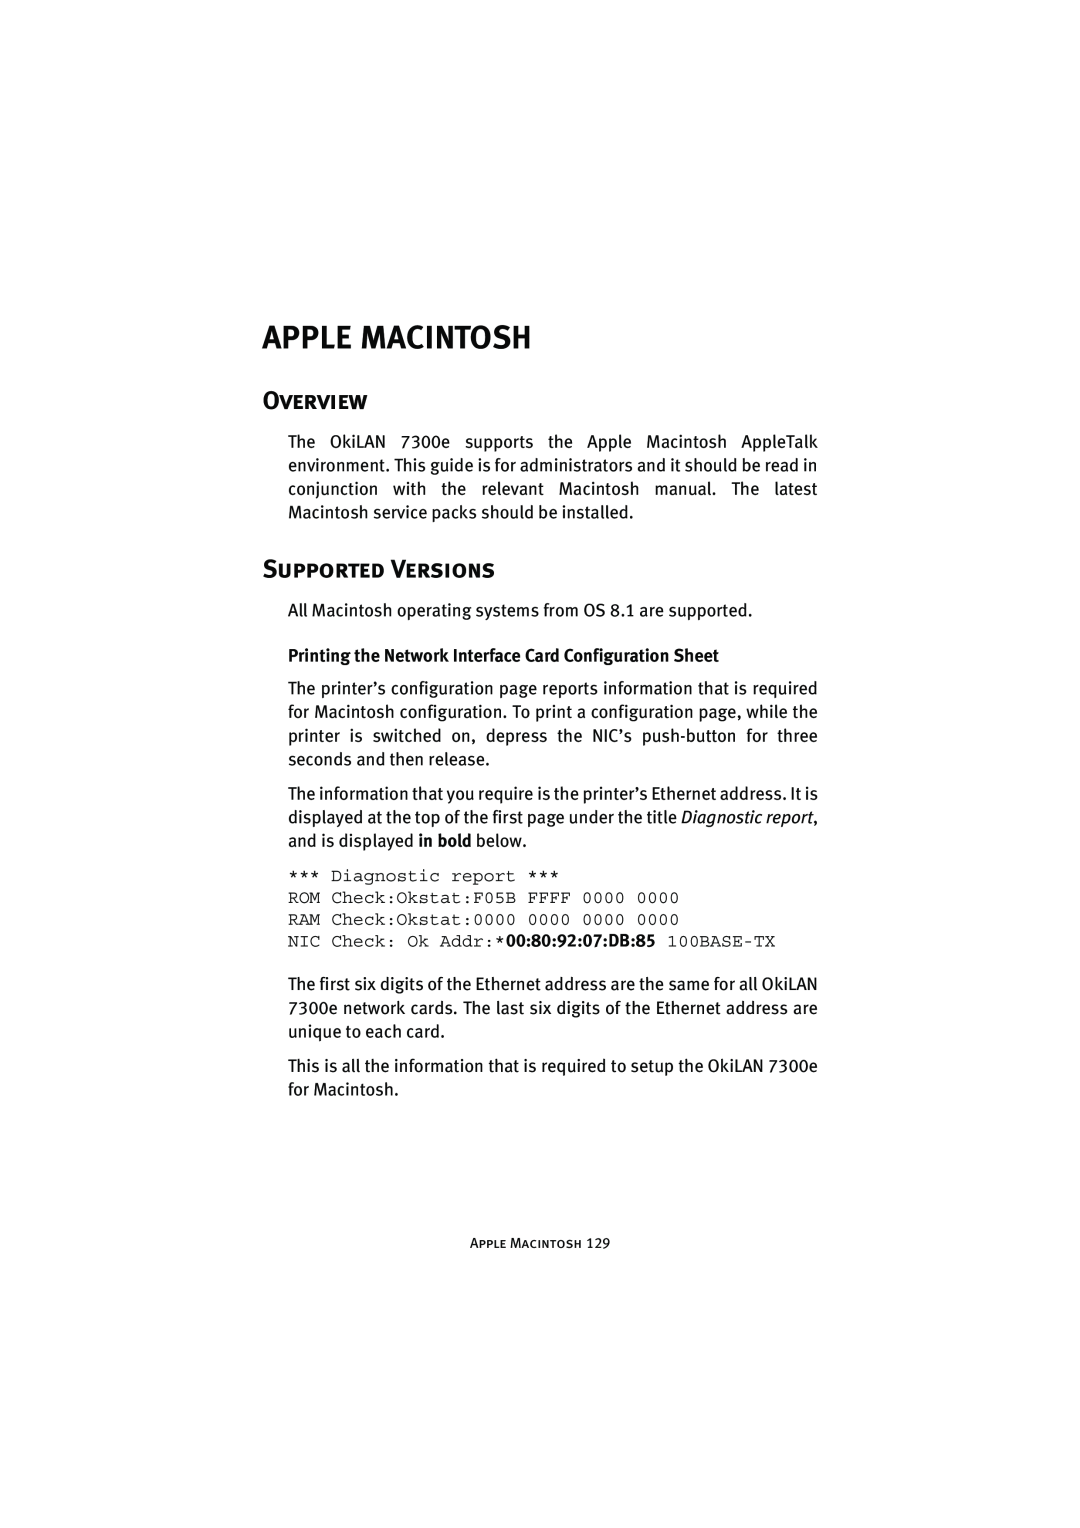 Oki 7300e manual Apple Macintosh, Supported Versions, Overview 